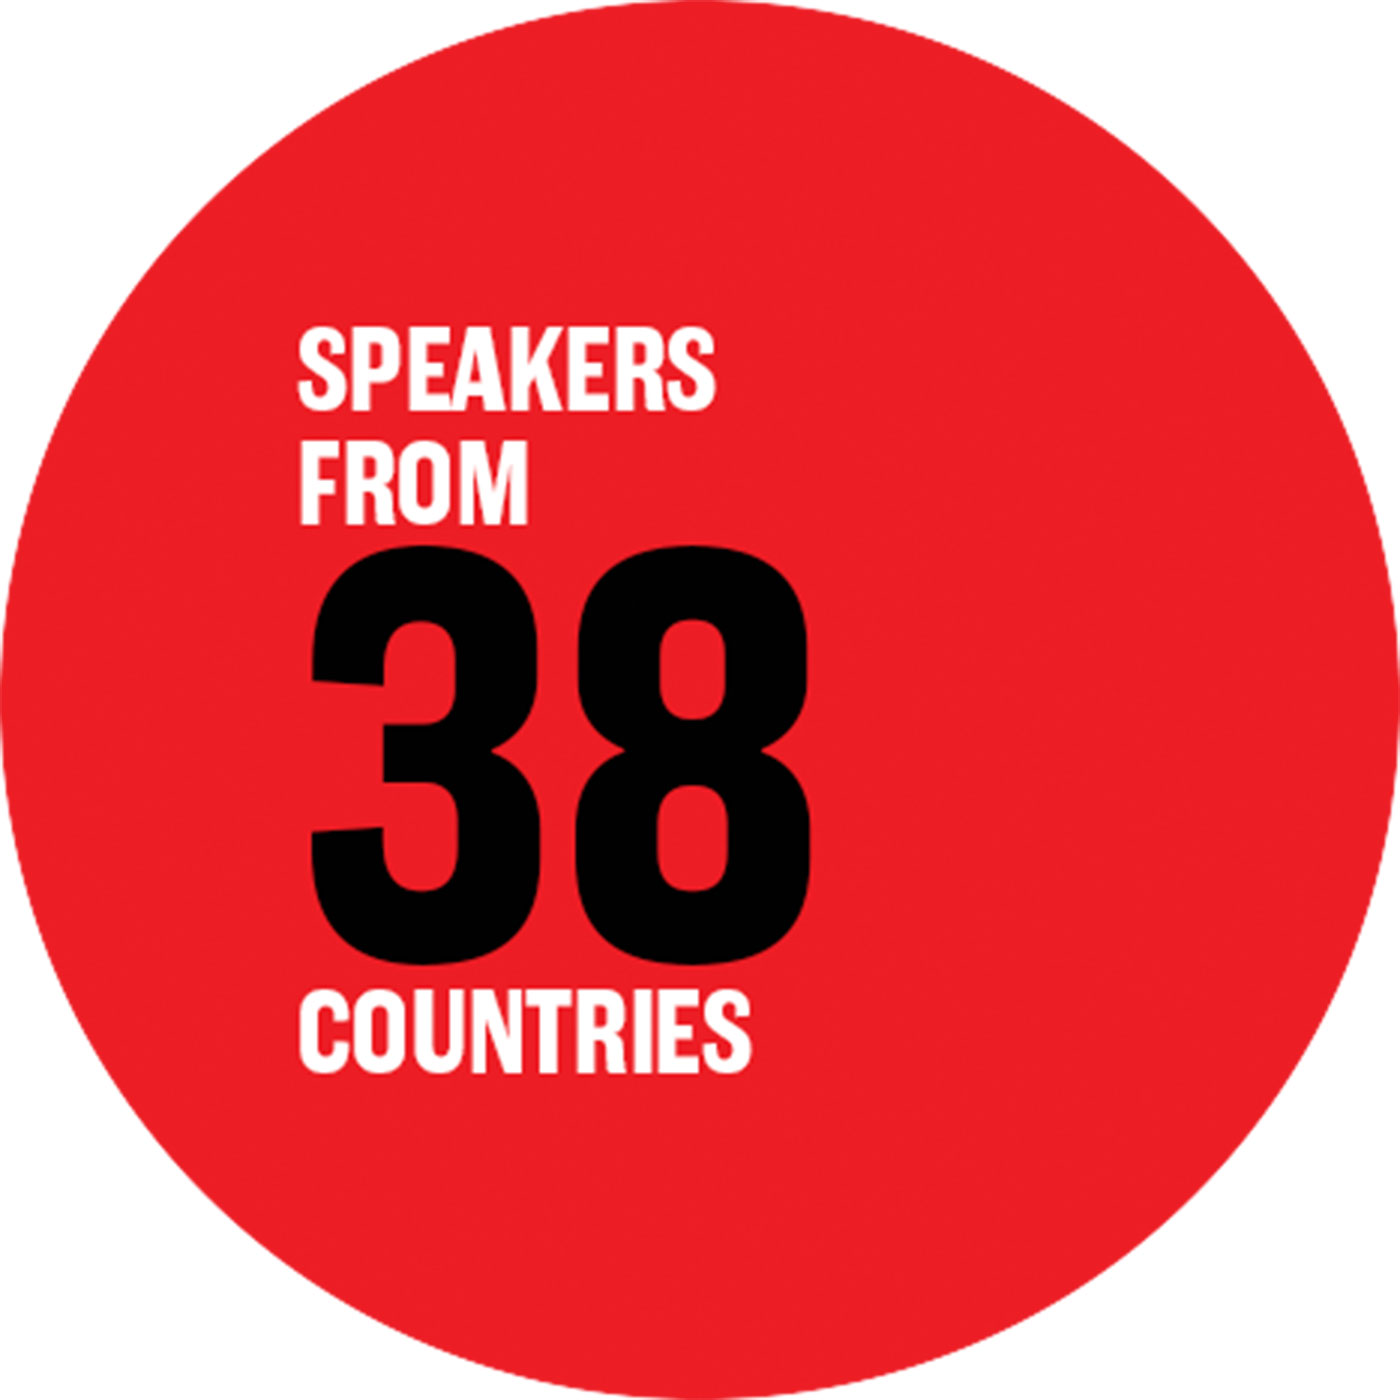 speakers from 38 countries